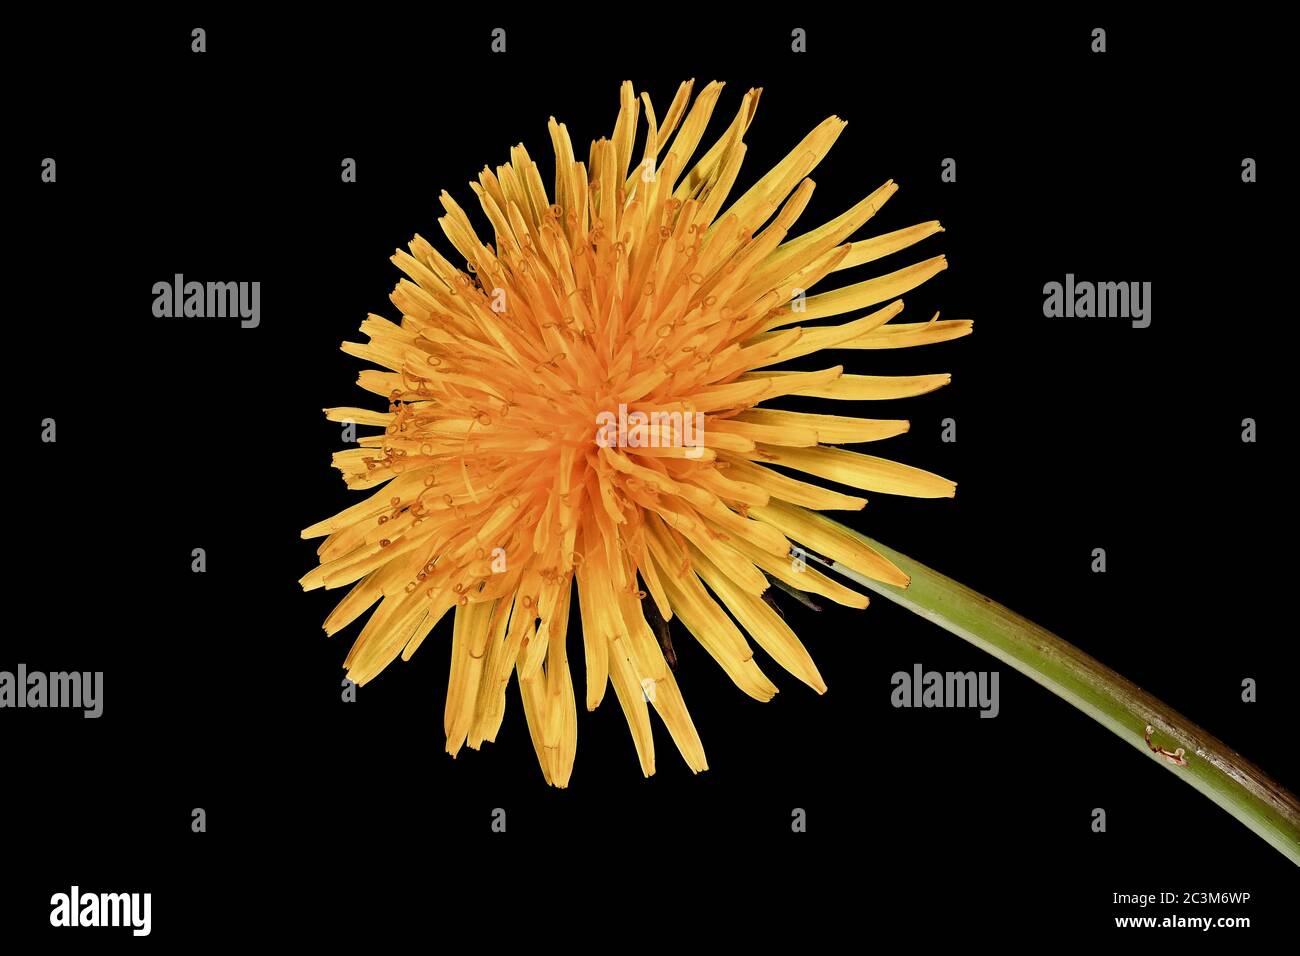 Dandelion - Taraxacum officinale - on black background - from left - side view - isolated - as background Stock Photo